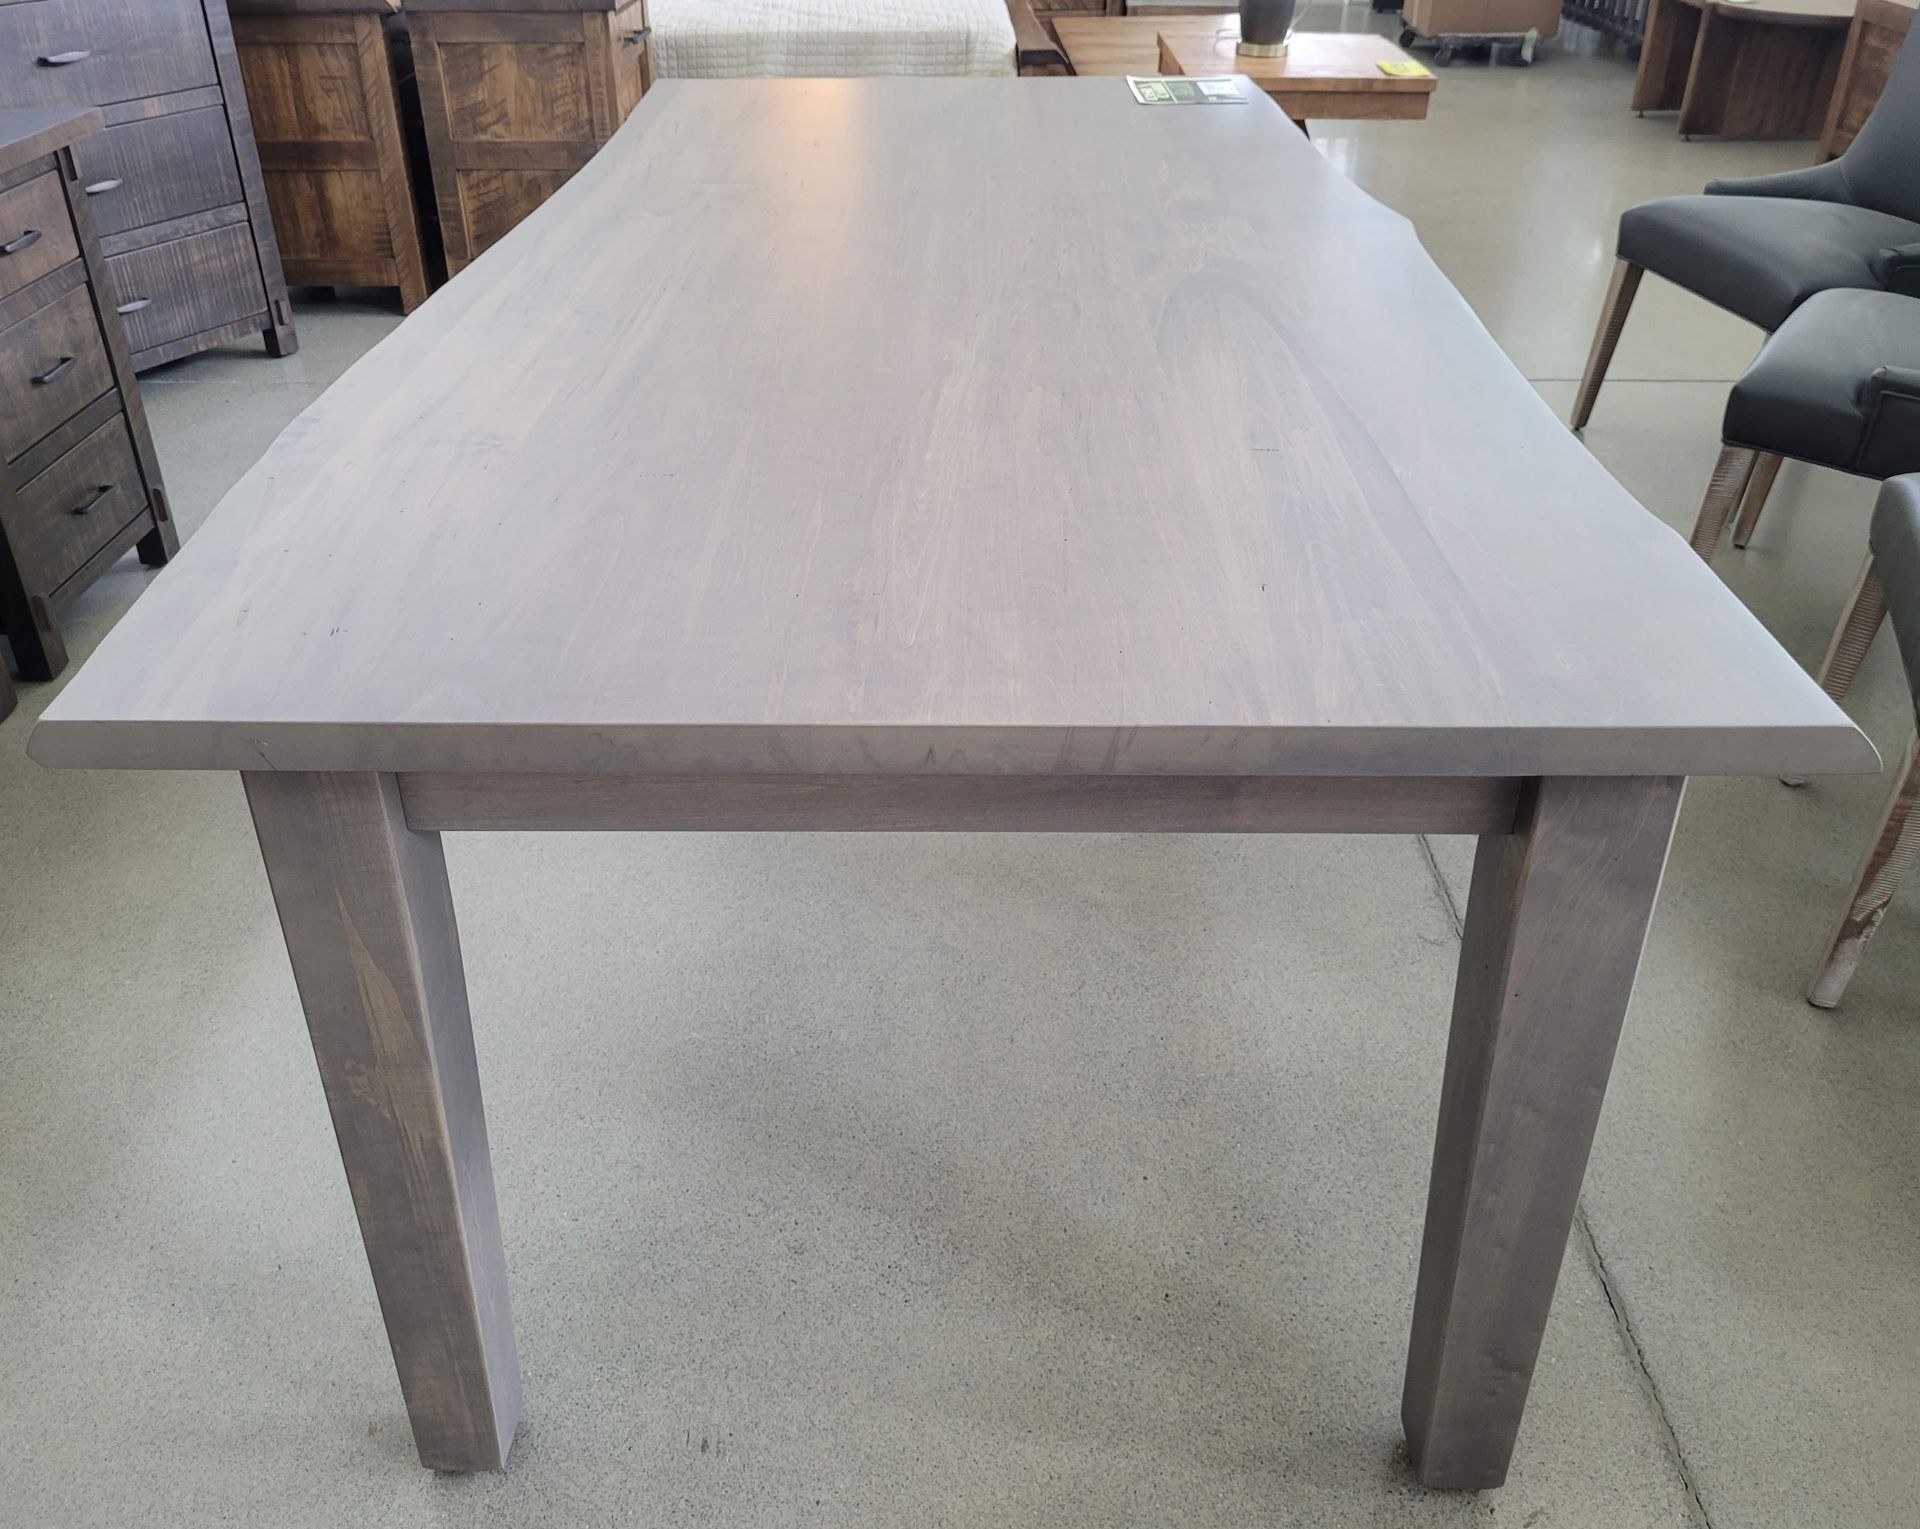 NORAH LIVE EDGE DINING TABLE - MSRP $3,600.00 - (TABLE ONLY - CHAIRS LOTTED SEPARATELY) - Image 2 of 8